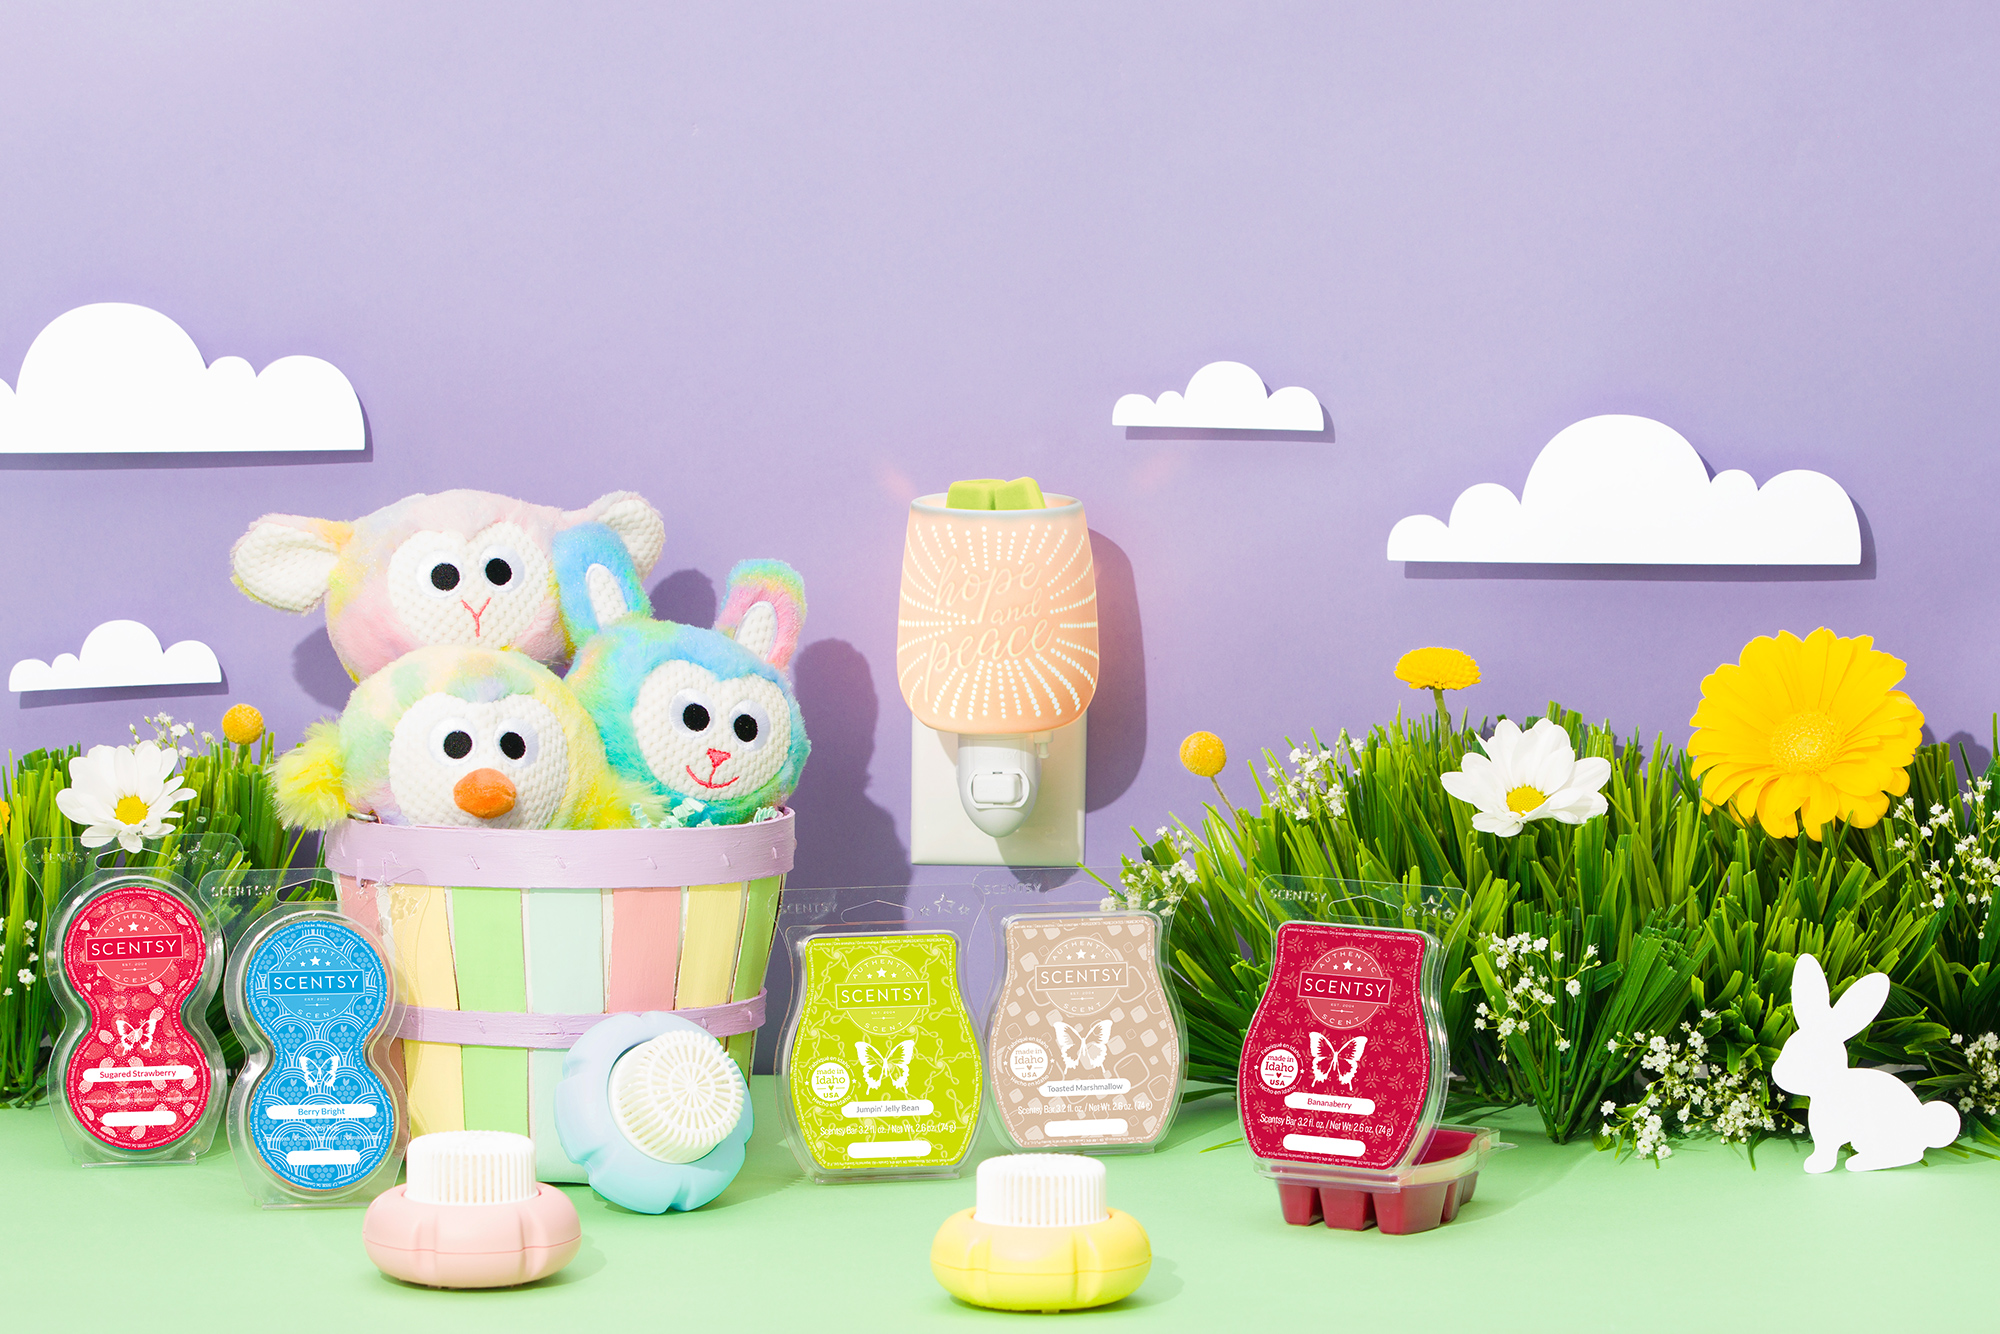 Building the perfect Easter Basket, Scentsy style